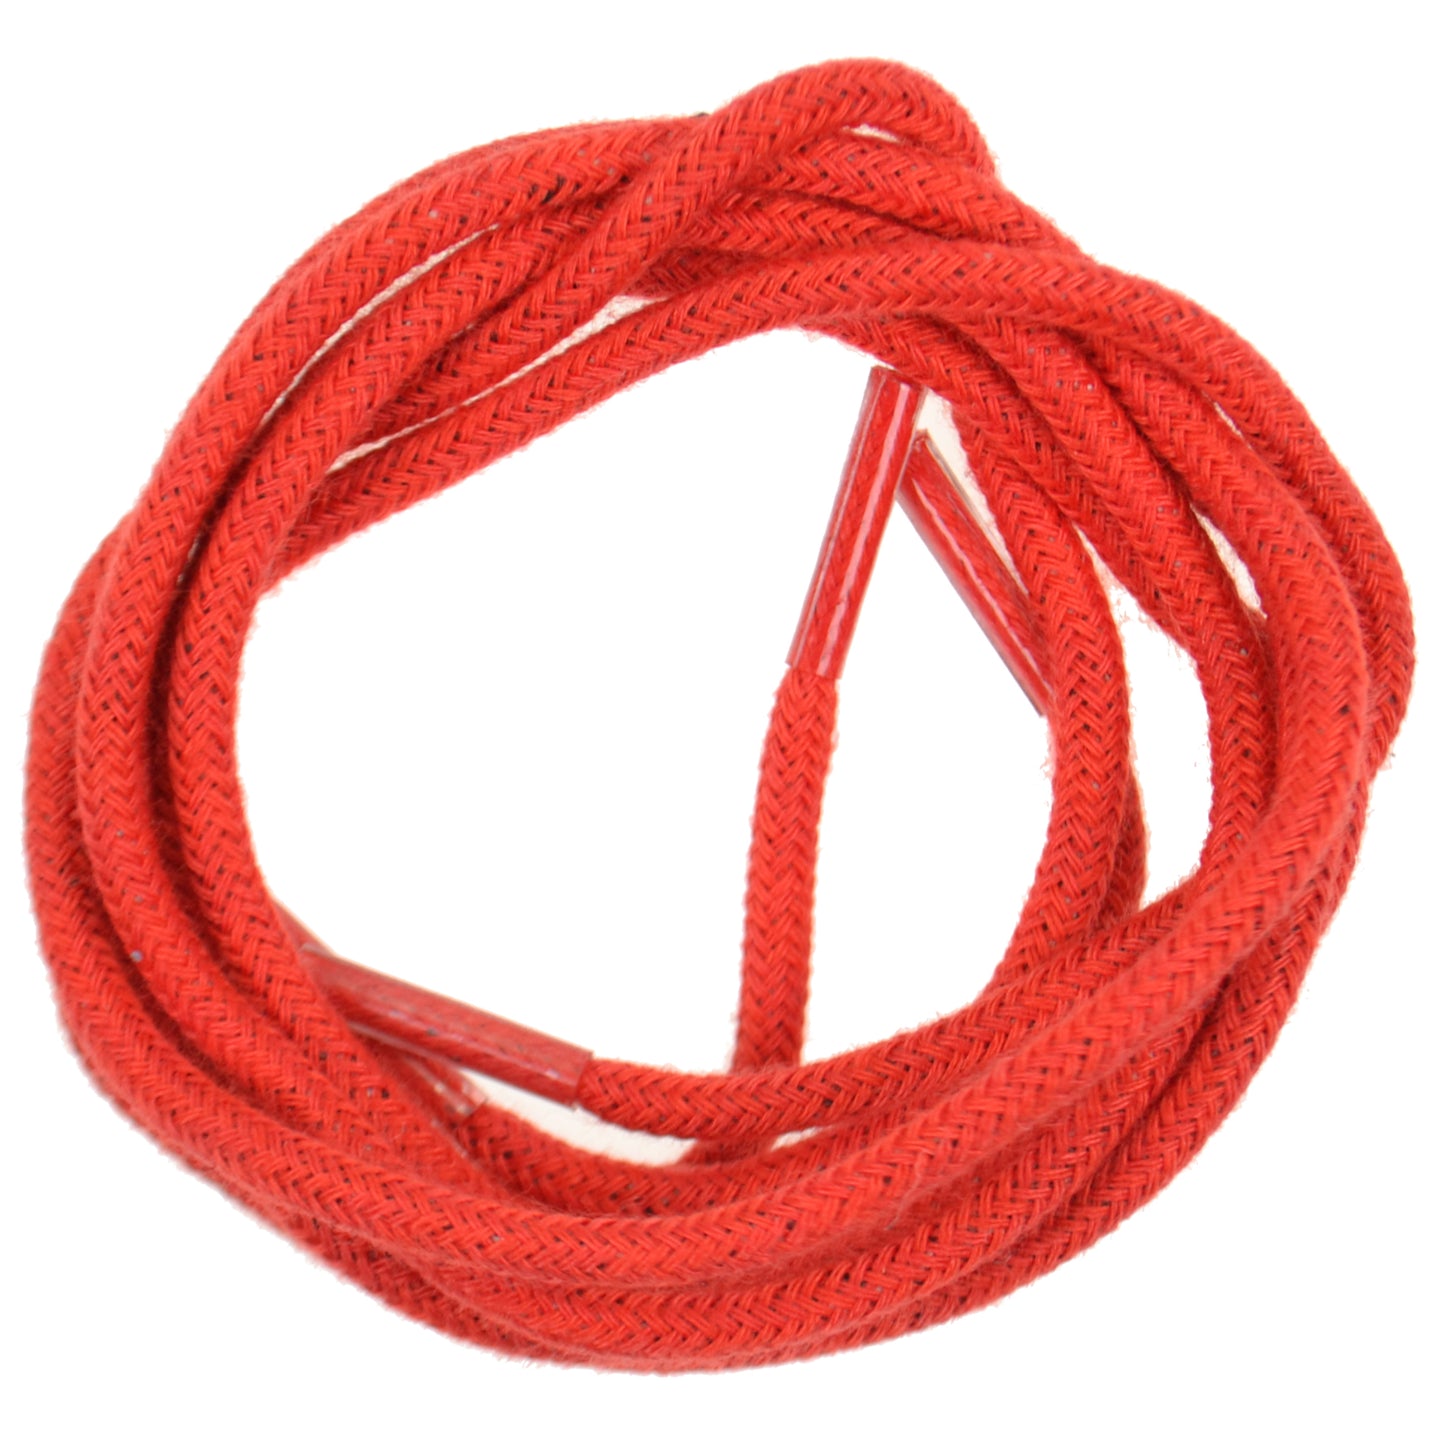 45cm Round Shoe Laces - Red